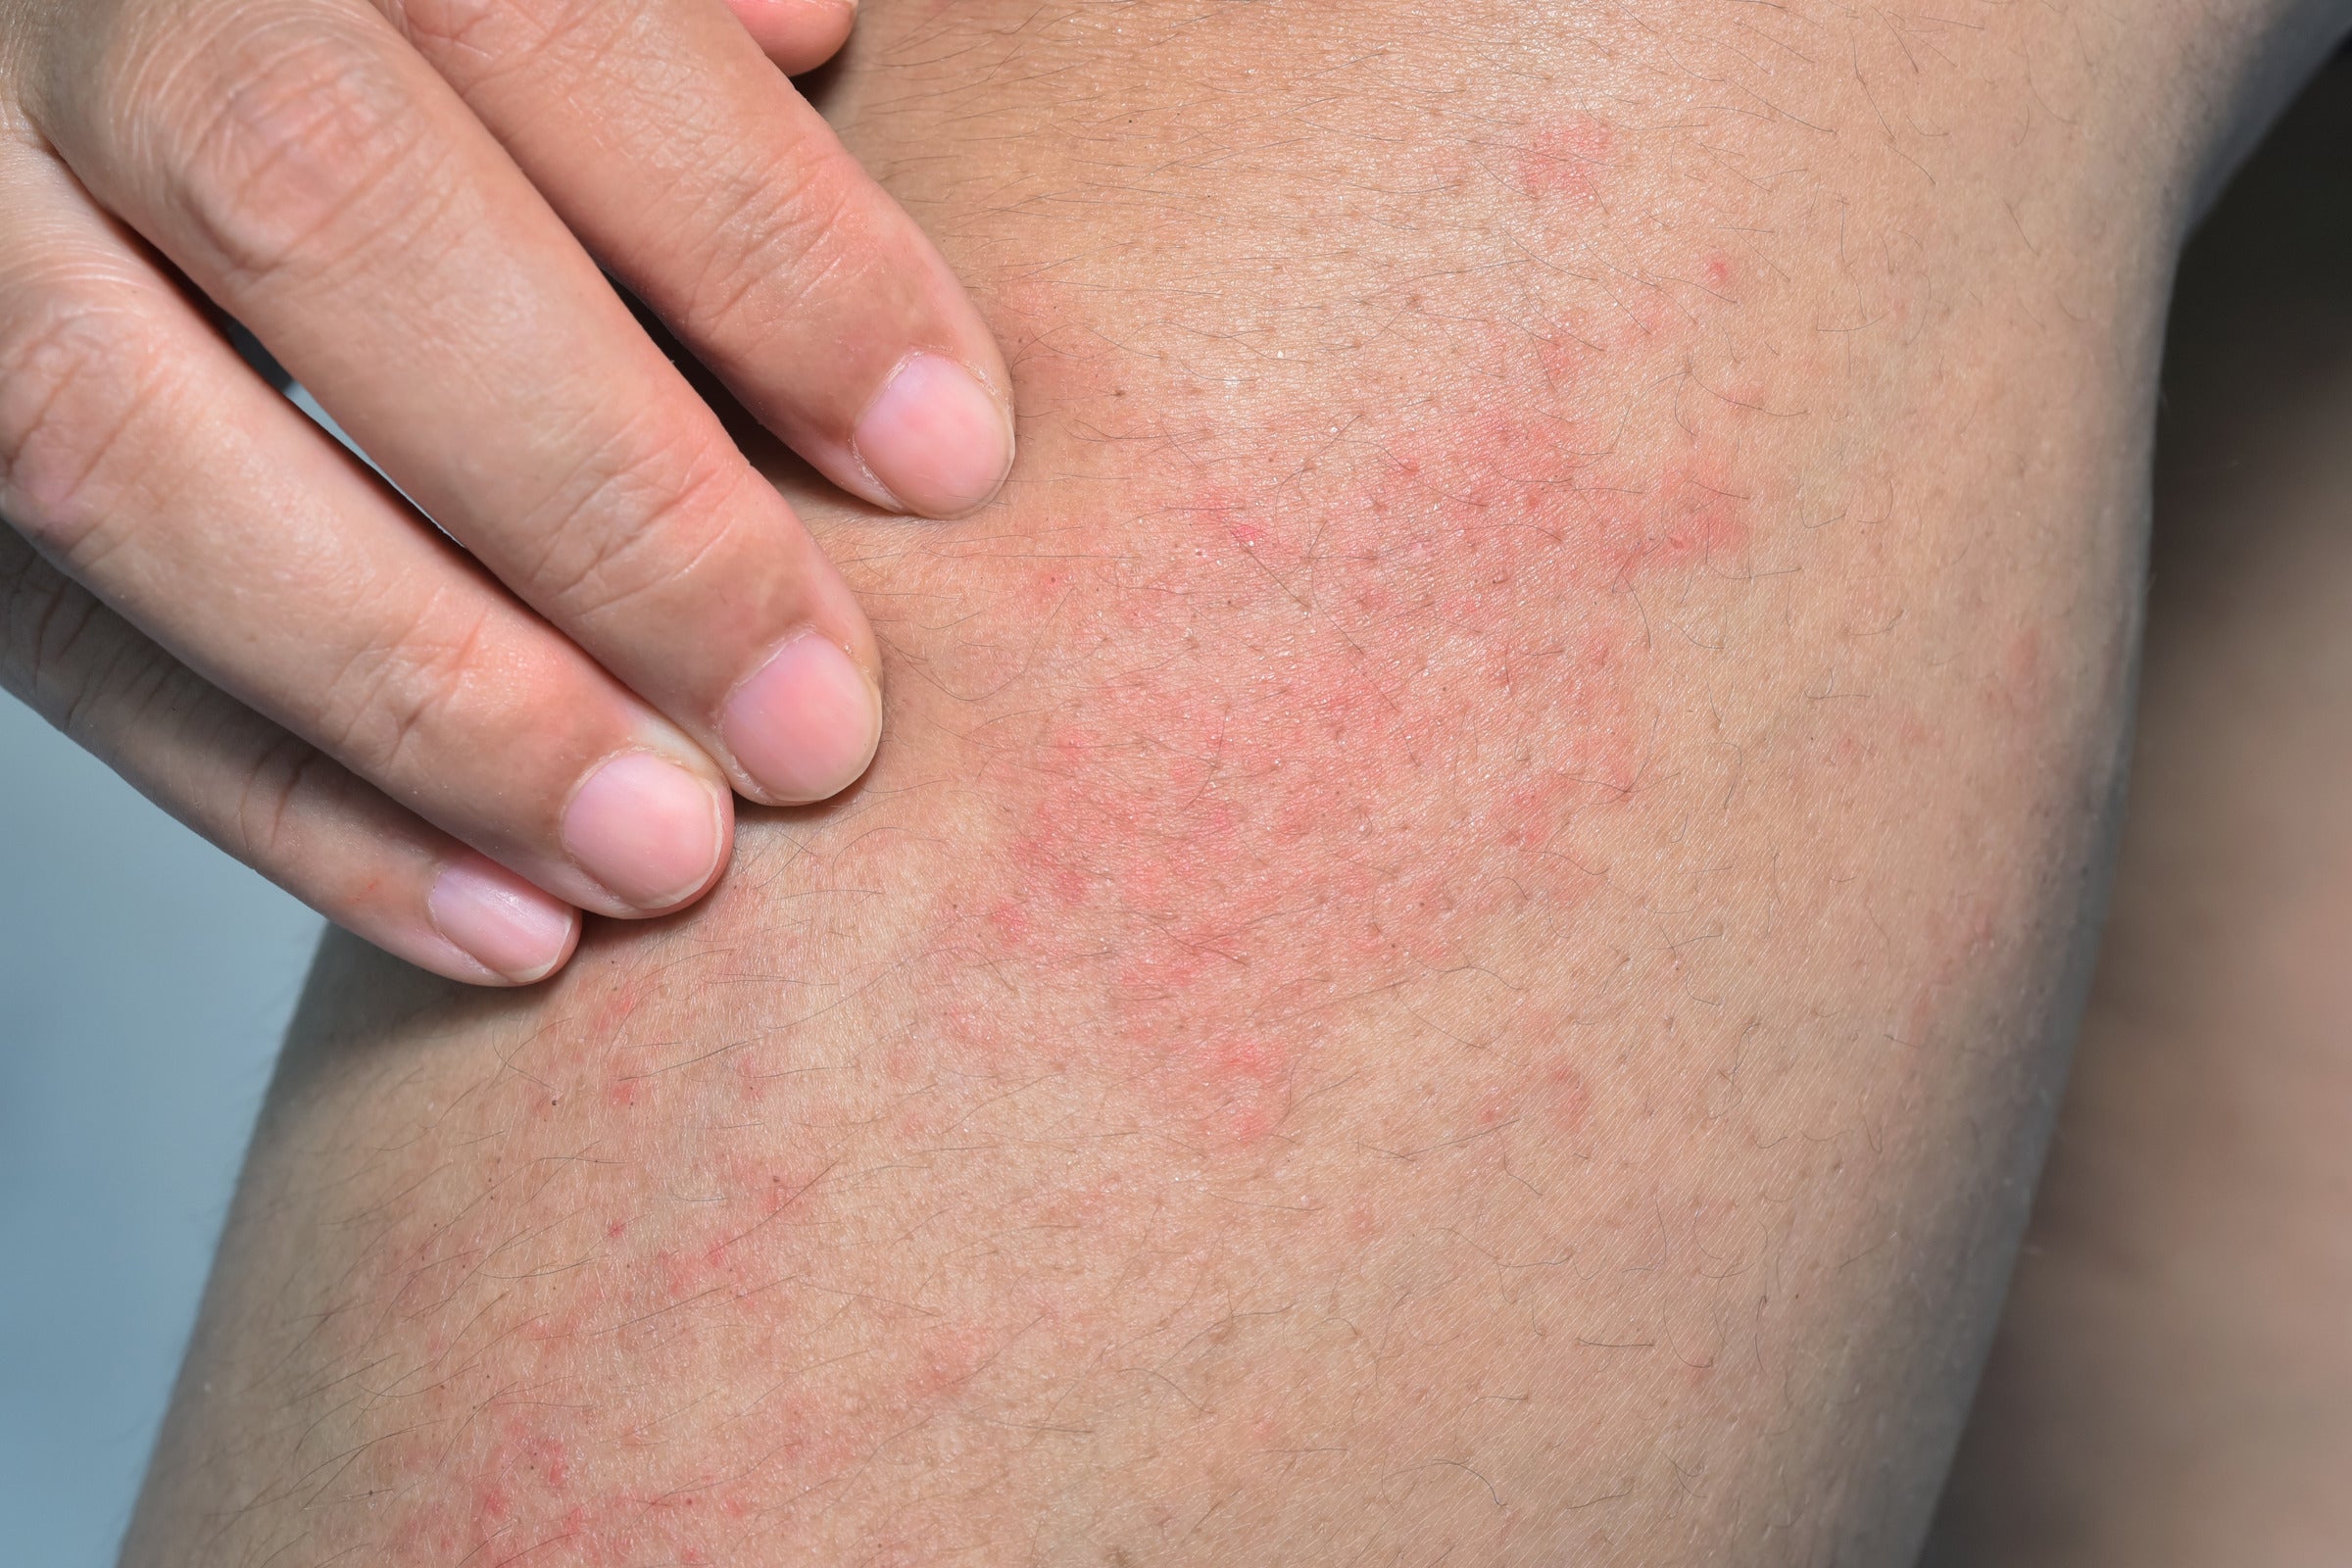 6 common symptoms of food allergy-induced itchy skin